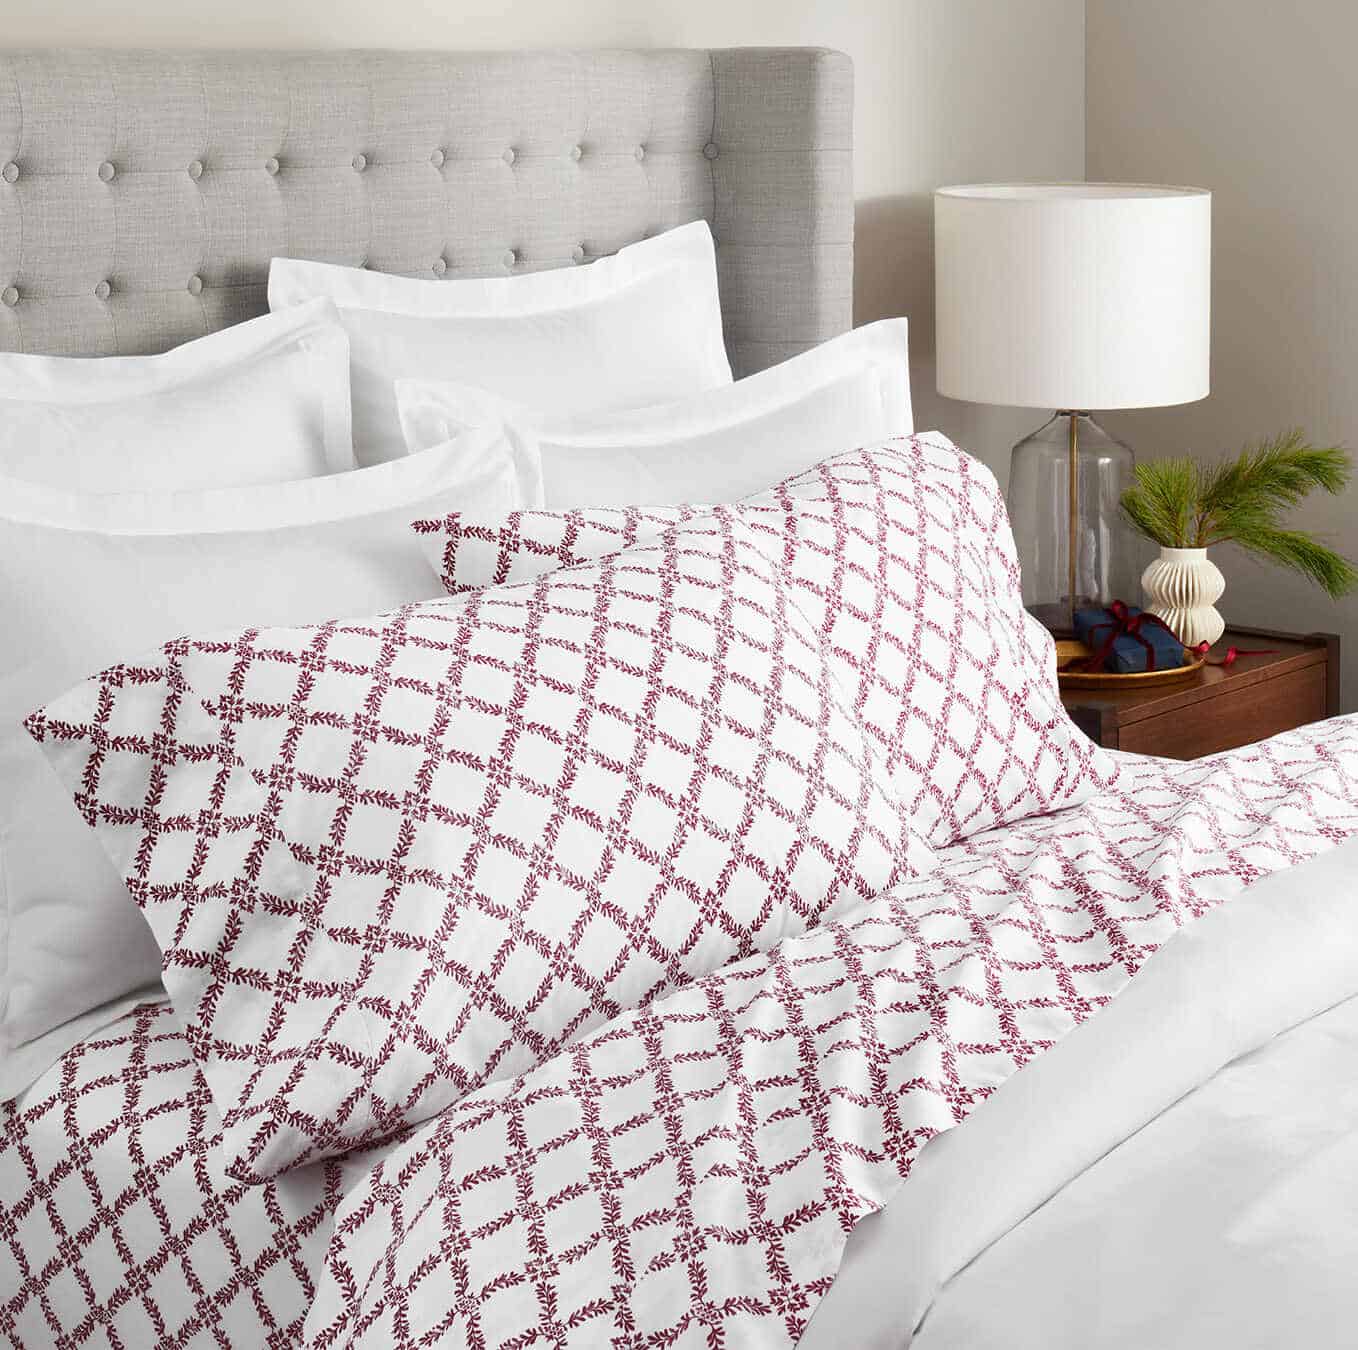 Pair Your Gray Comforter With A Beautiful Cranberry Lattice Pattern